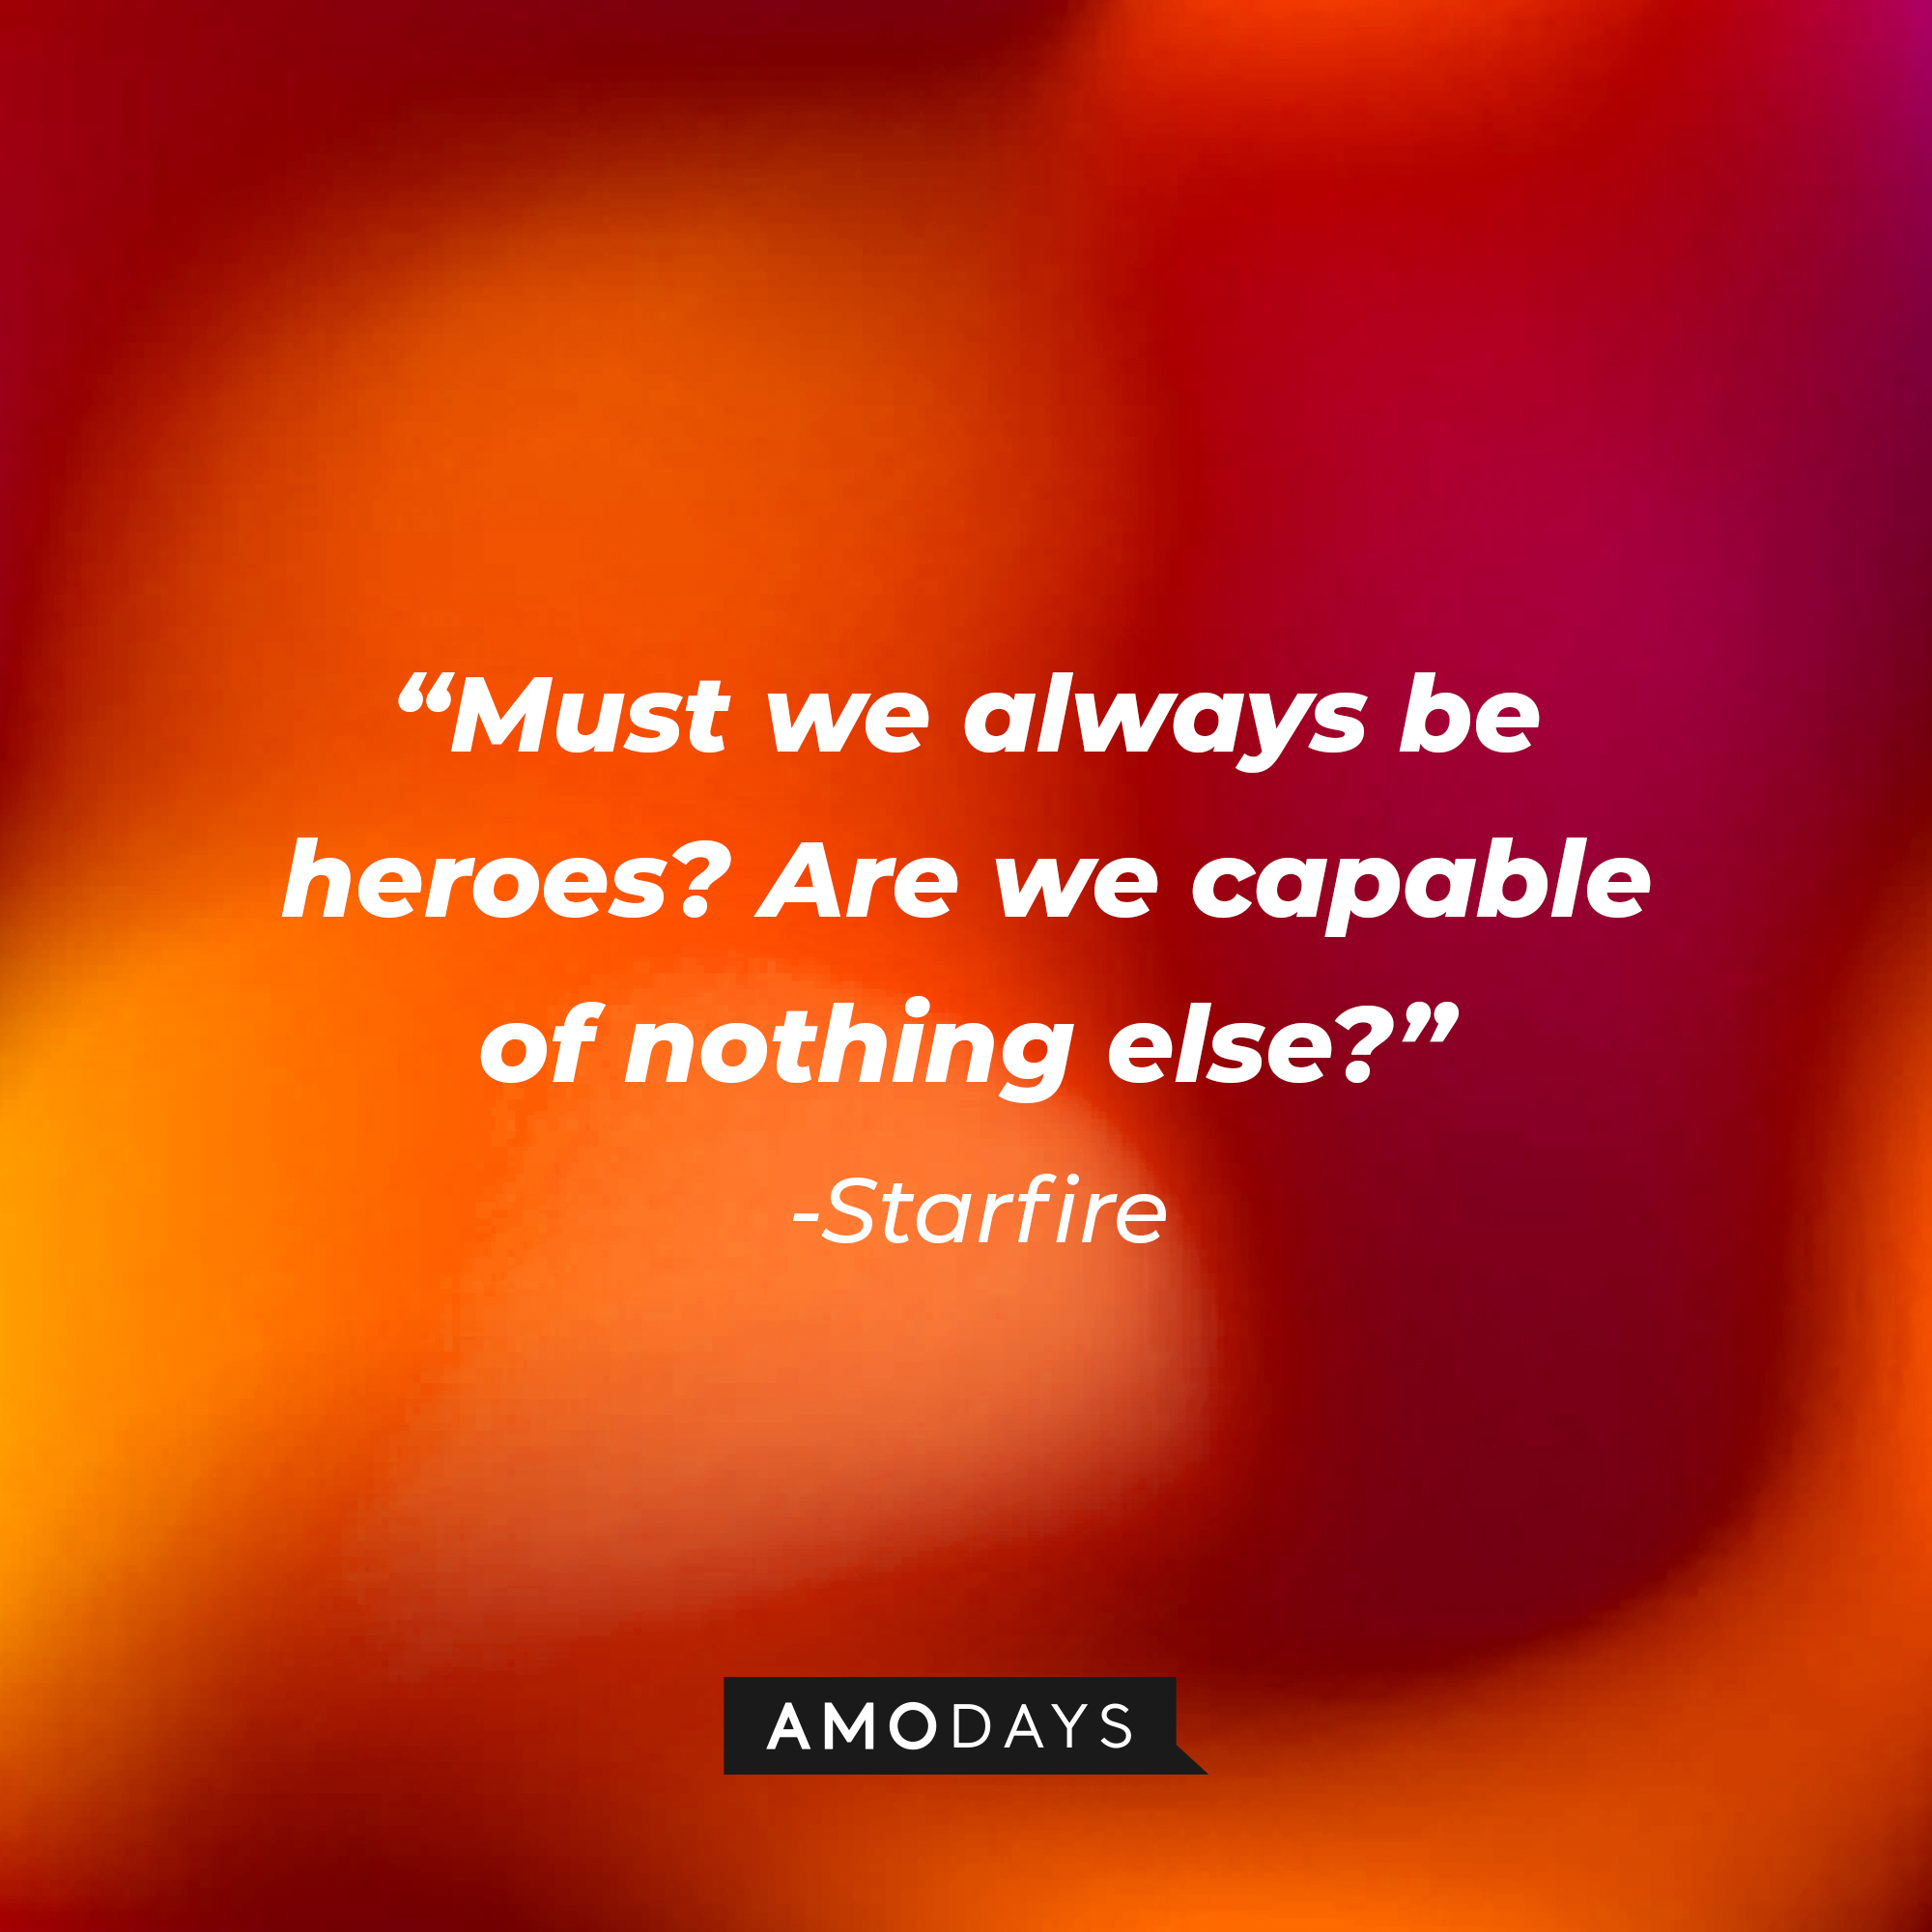 Starfire’s quote: "Must we always be heroes? Are we capable of nothing else?" | Source: AmoDays